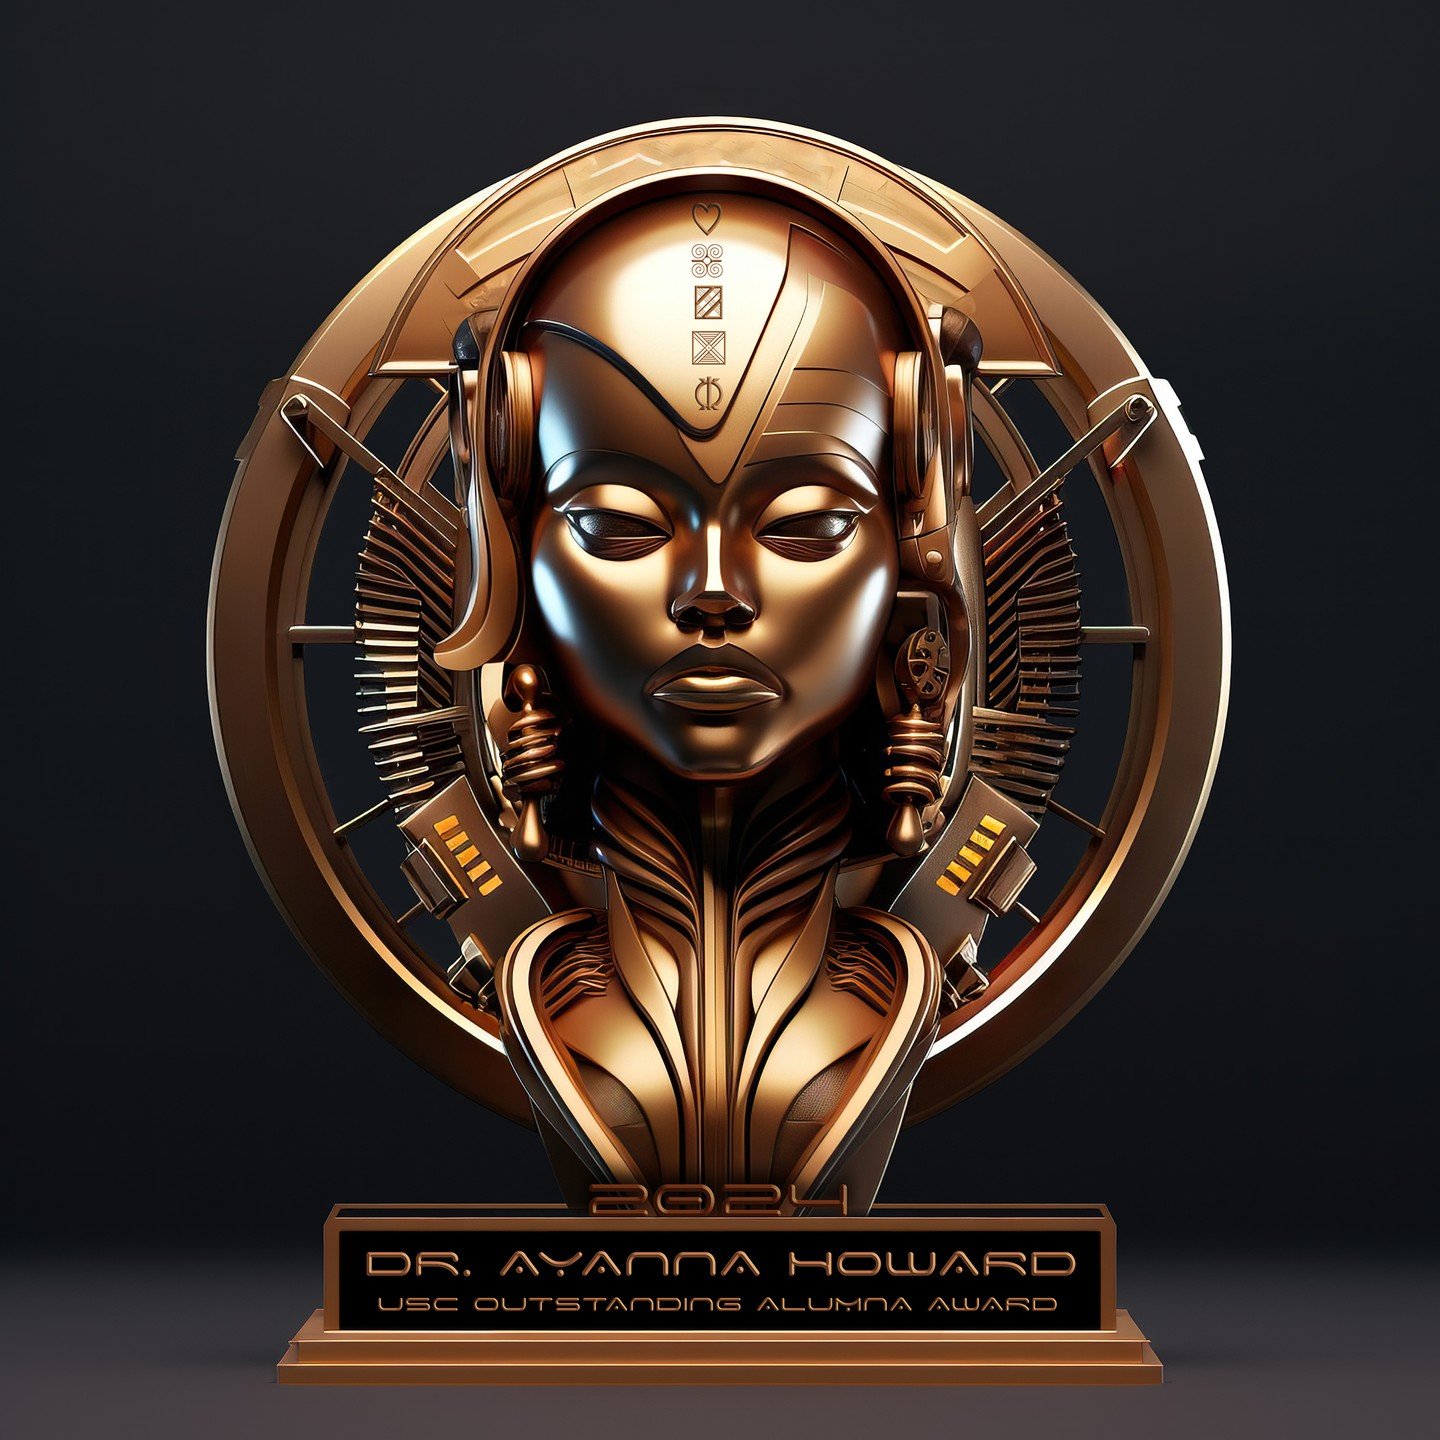 From my affiliation with the group @sugargamers and @sugargamerslabs which made the connection for me with @tech_picasso I had been chosen/given the honor recently to design some interesting awards for USC Black Alumni Association. These awards were 